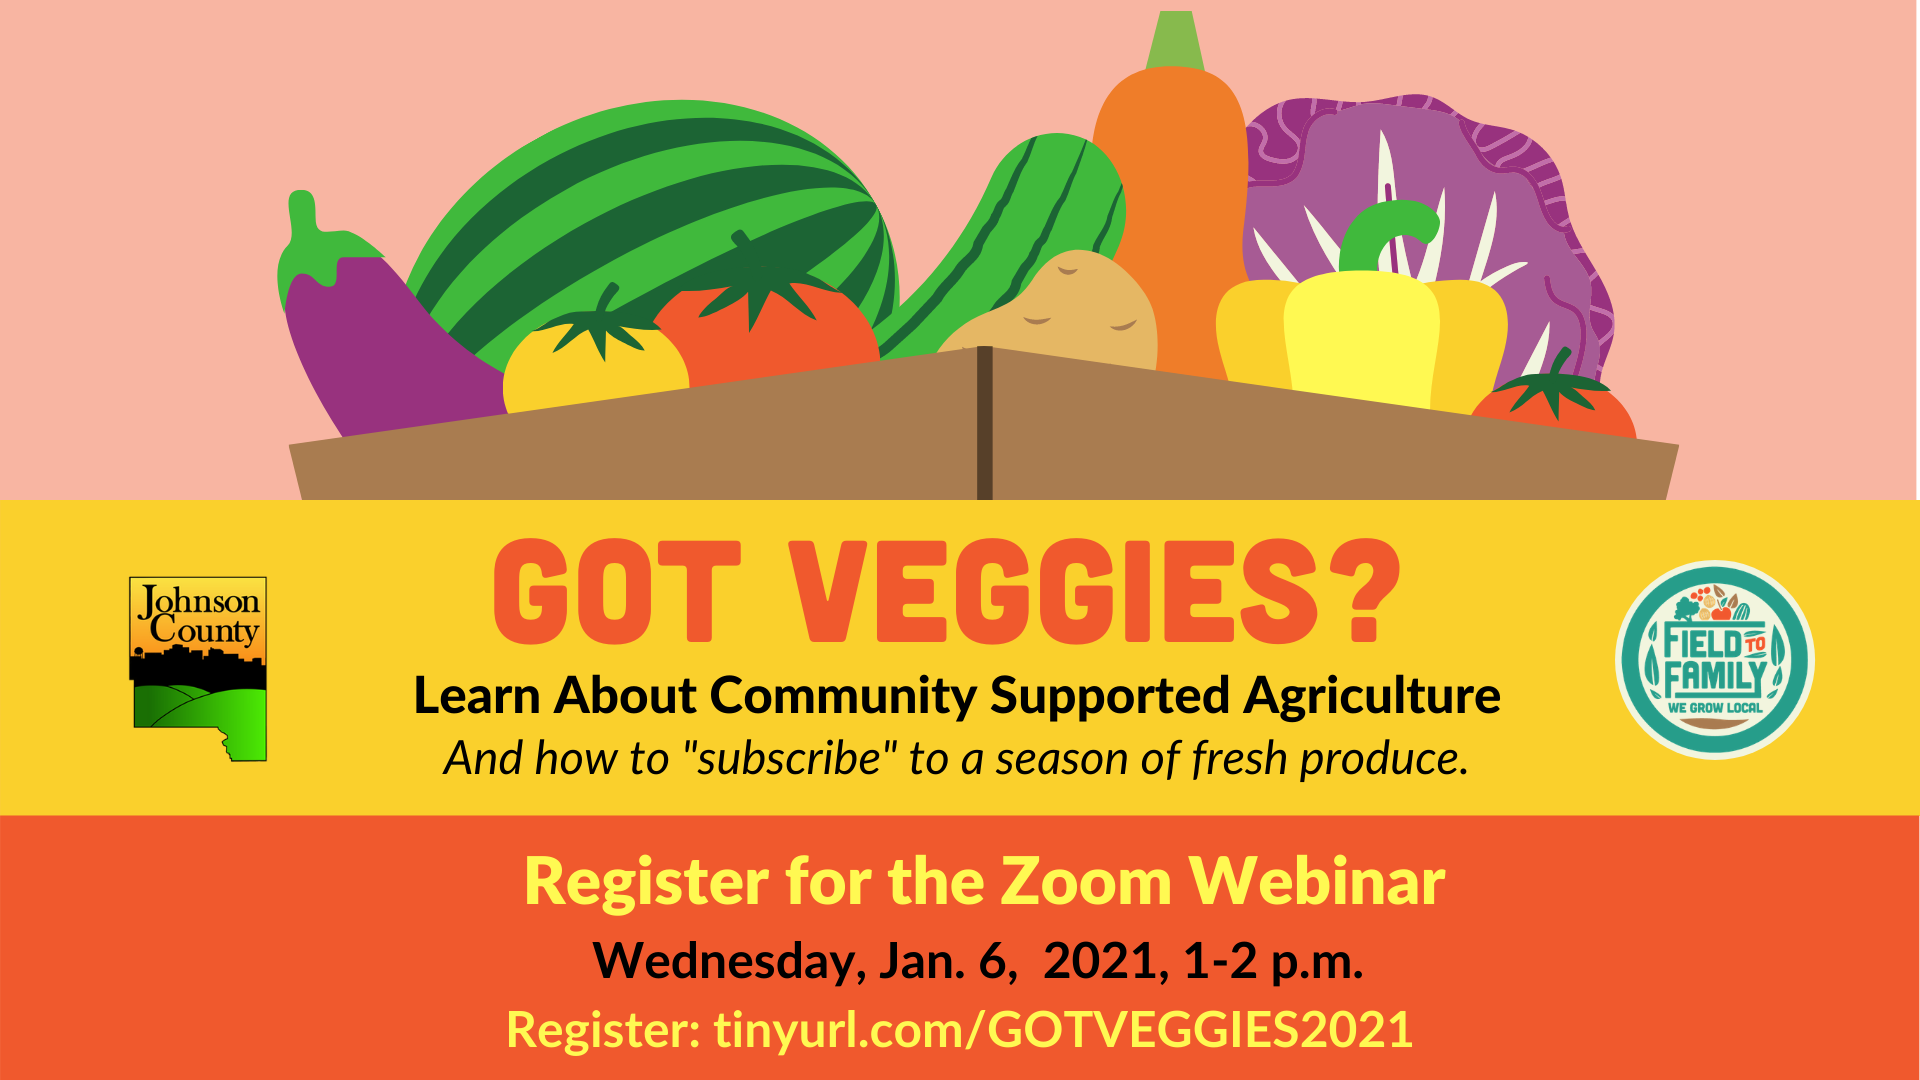 Got Veggies? Learn about community supported agriculture and how to "subscribe" to a to a season of fresh produce. Register for the Zoom Webinar on Wednesday, January 6, 2021, 1-2p.m. Register: tinyurl.com/GOTVEGGIES2021